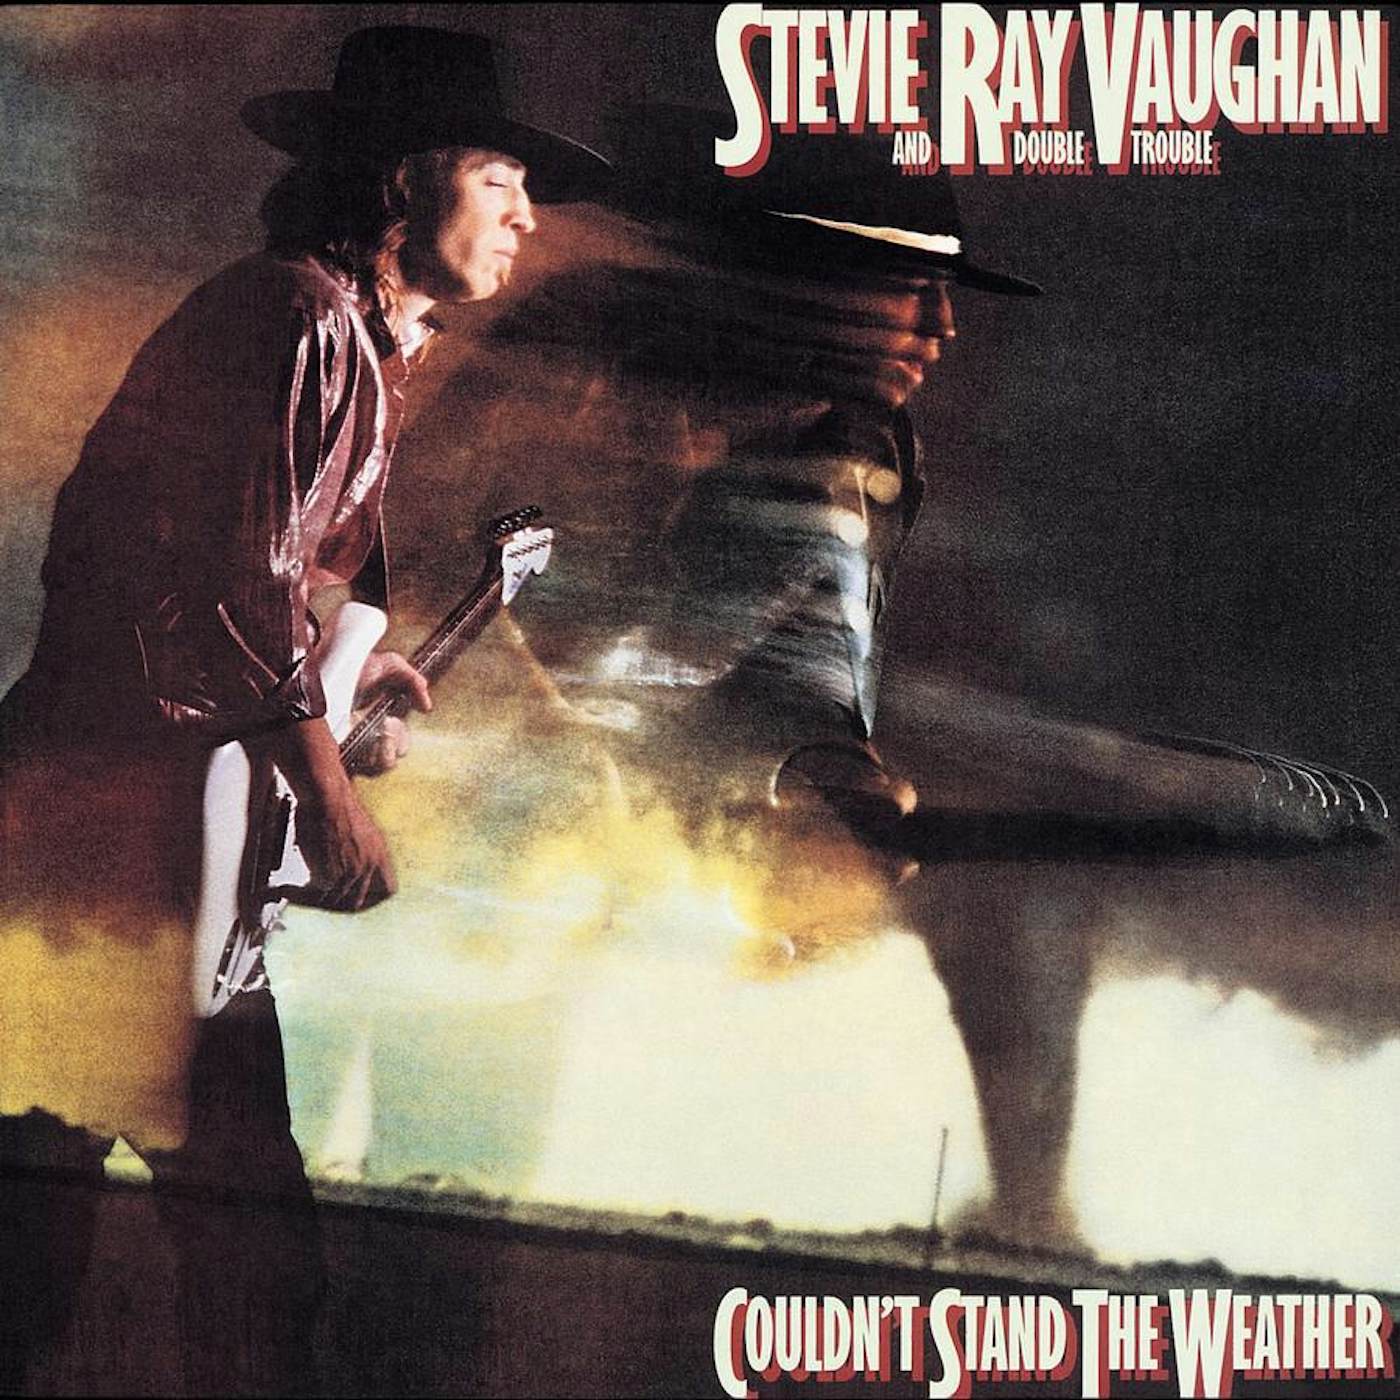 Stevie Ray Vaughan Couldn't Stand The Weather CD